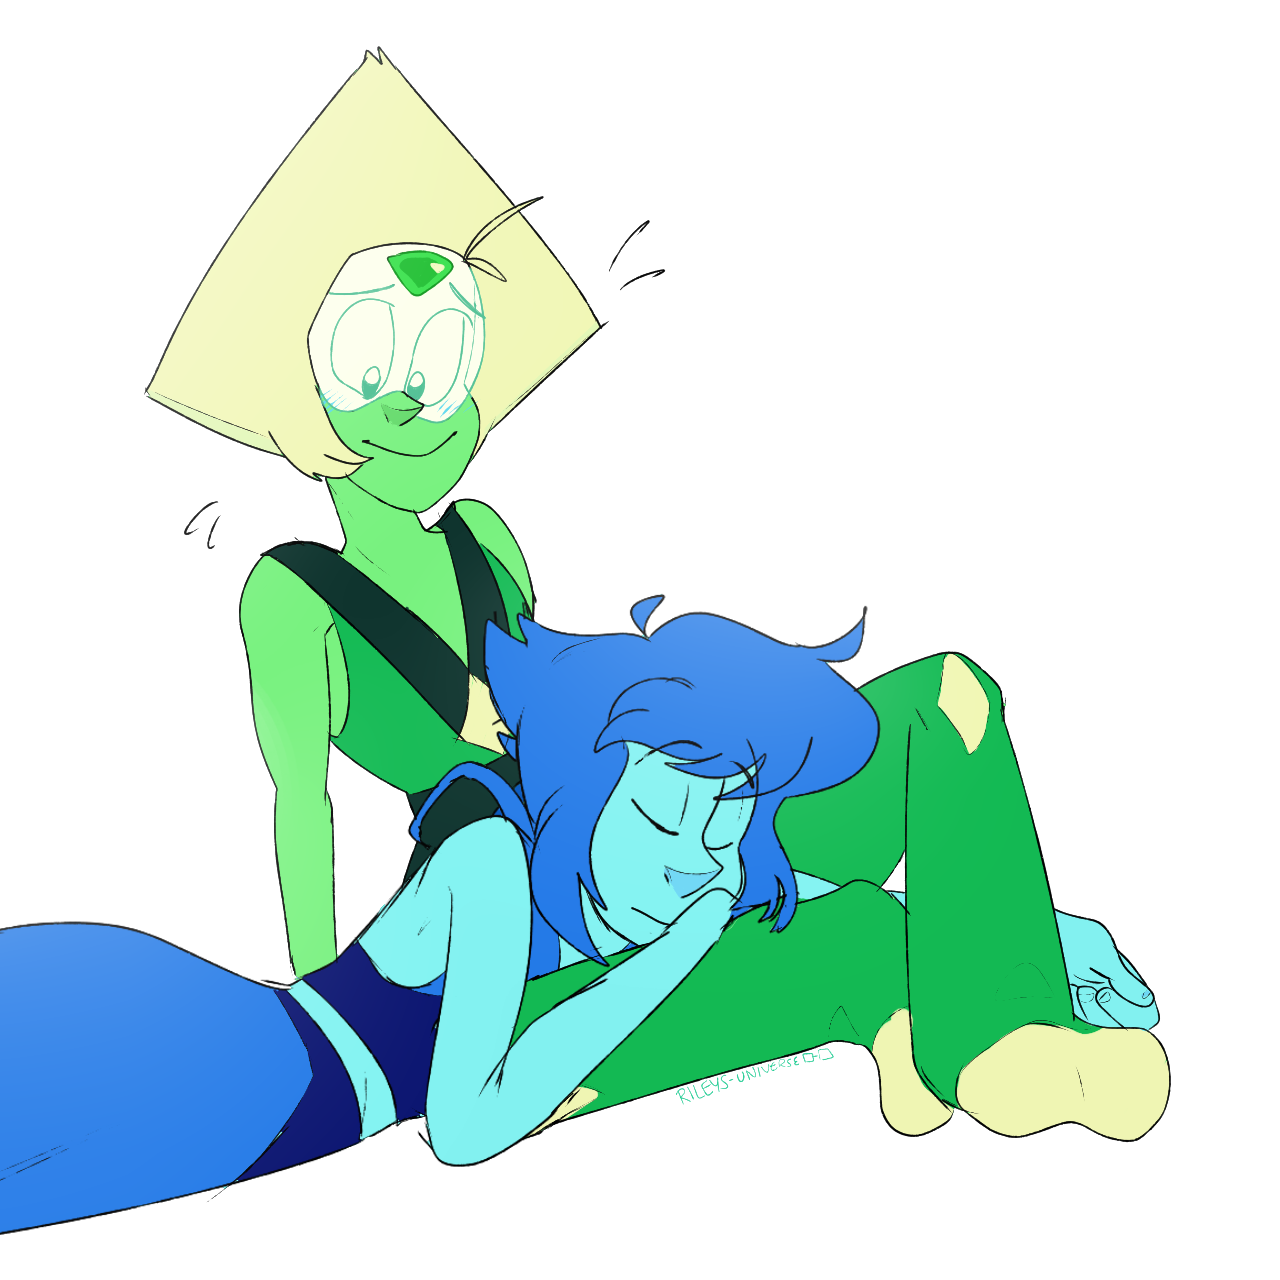 been havin a rough few days in my own head so i keep drawing lapidot help